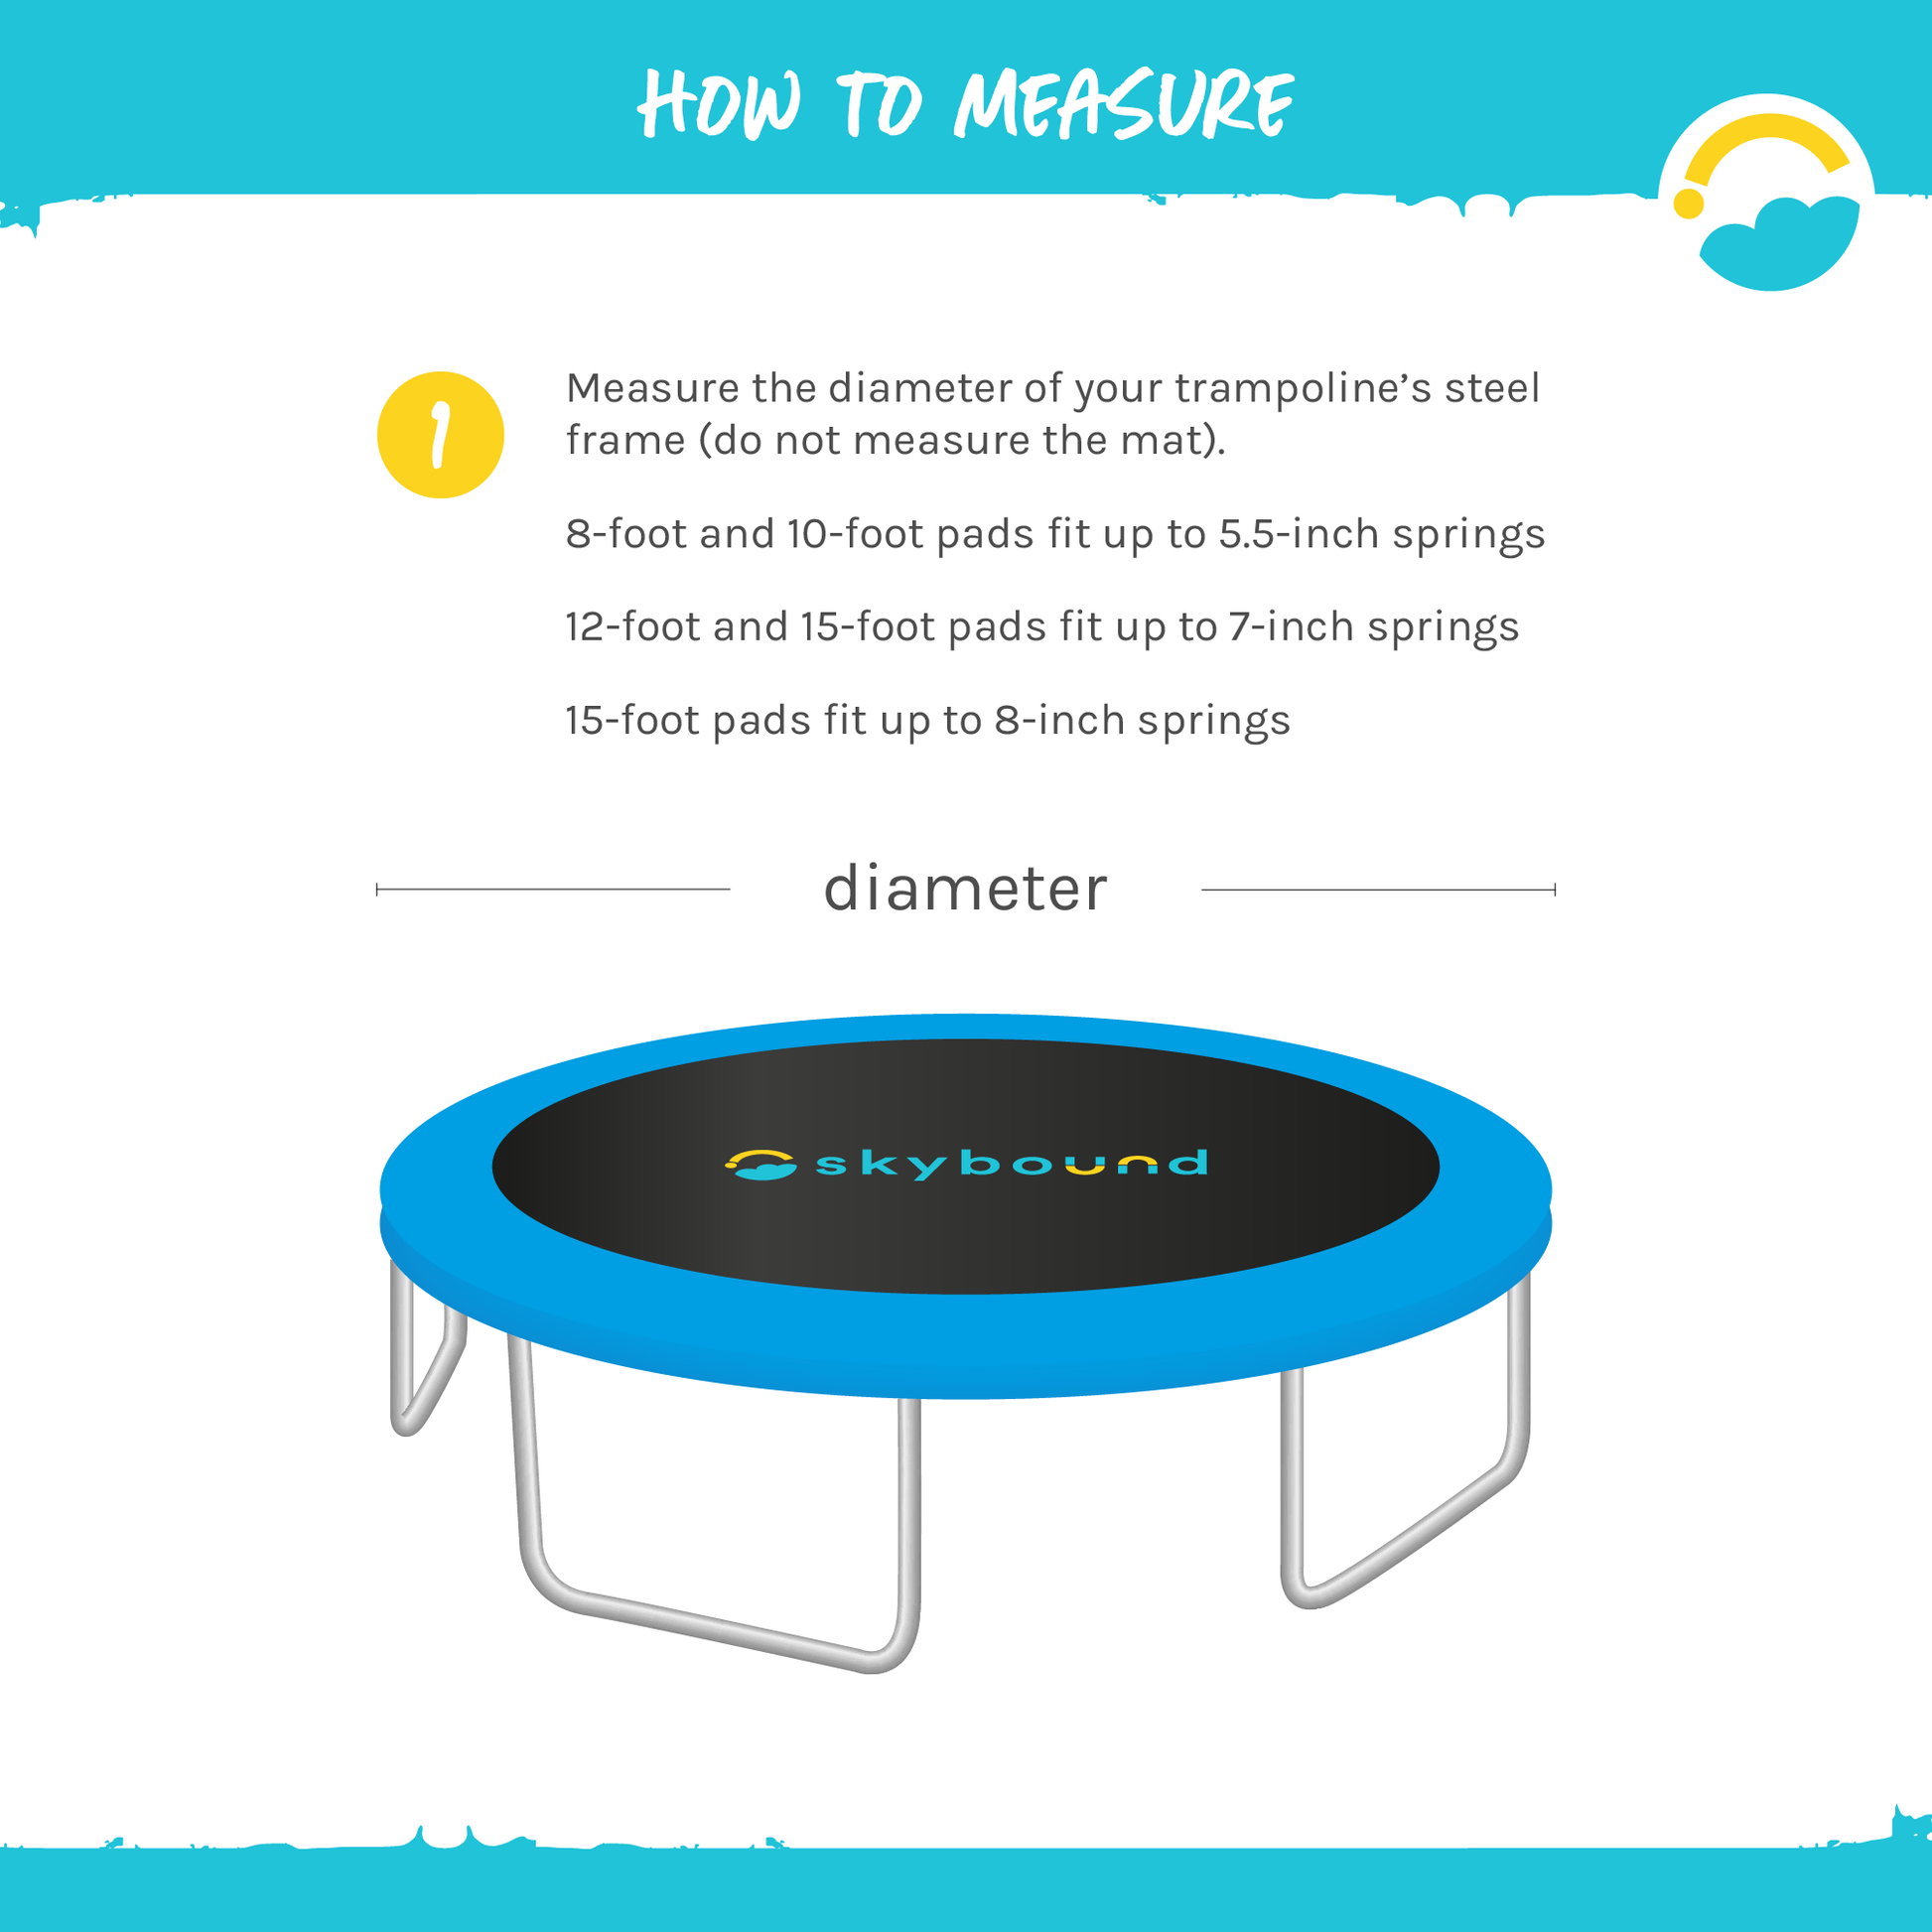 How to Measure: 1-Measure the diameter of your trampoline's steel frame (do not measure the mat). 8-foot and 10-foot pads fit up to 5.5-inch springs. 12-foot and 15-foot pads fit up to 7-inch springs. 15-foot pads fit up to 8-inch springs.